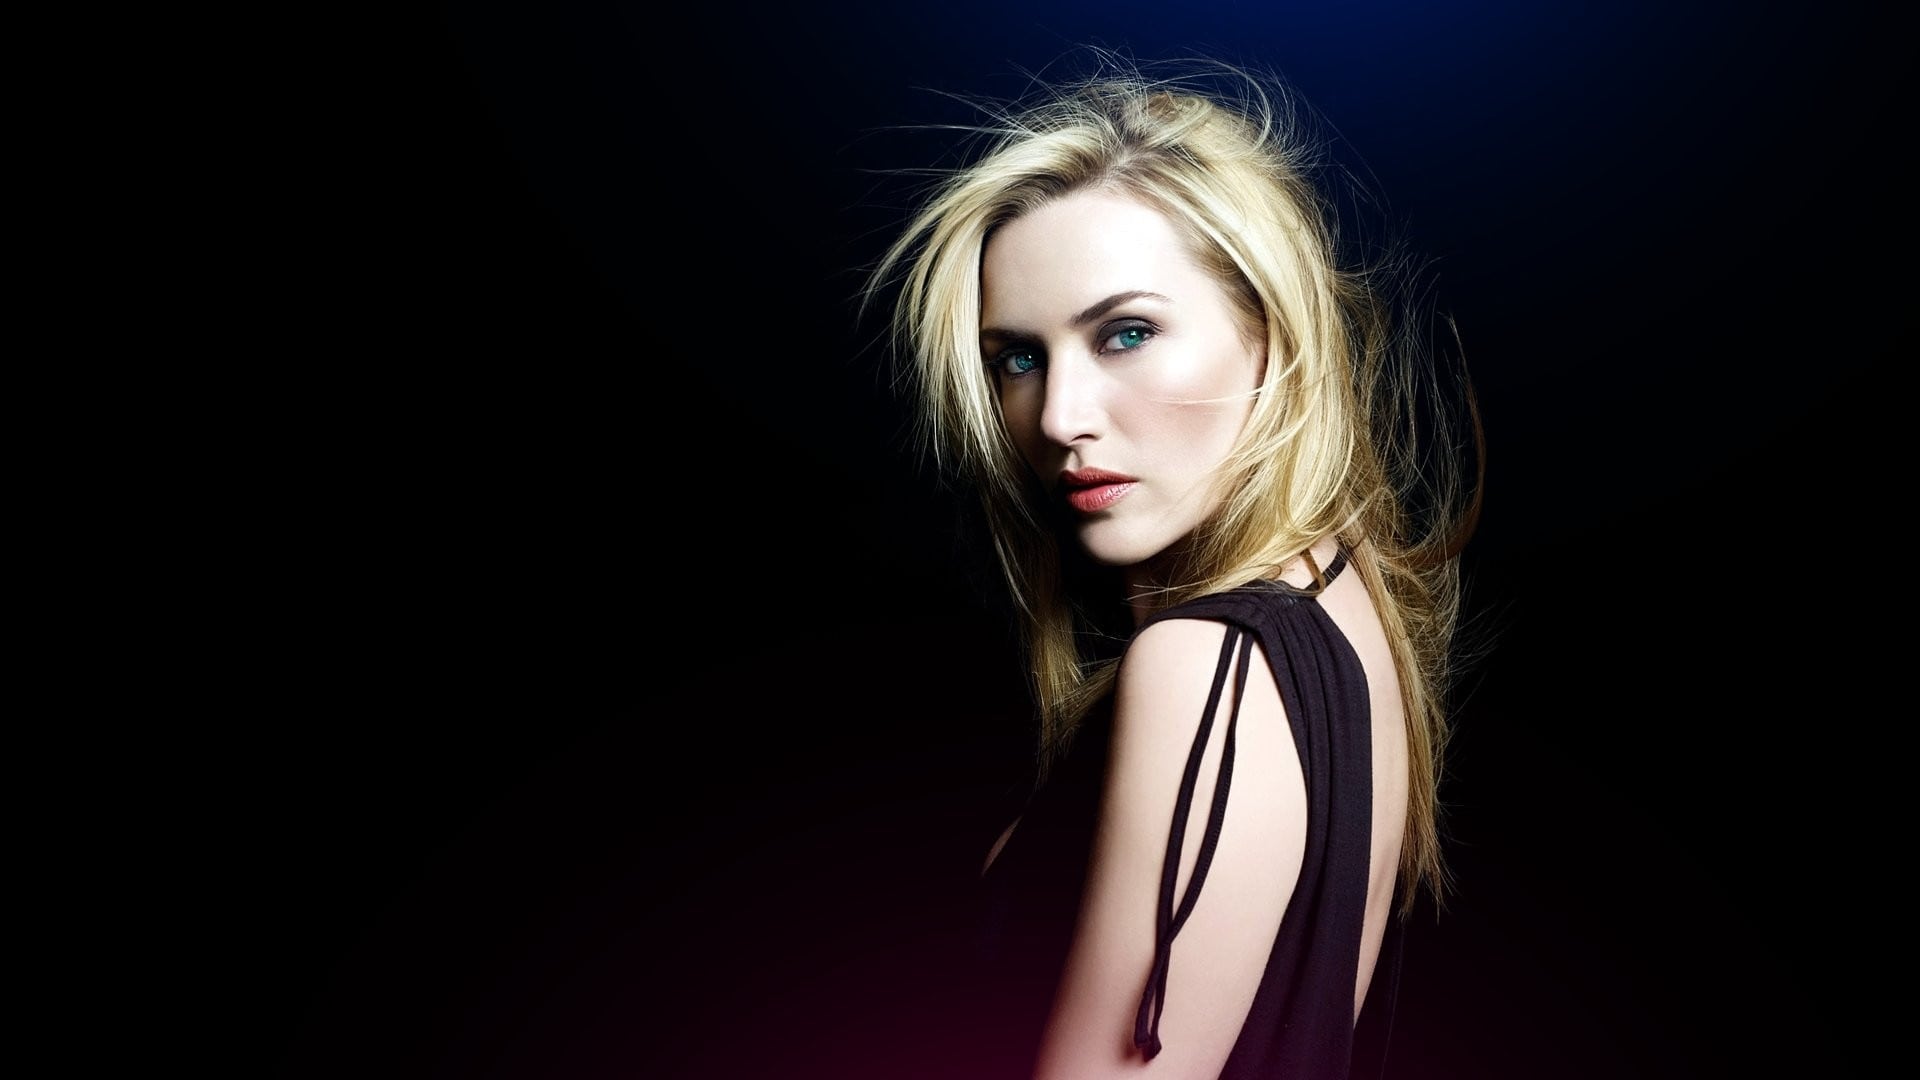 Kate Winslet Rare Images Wallpapers